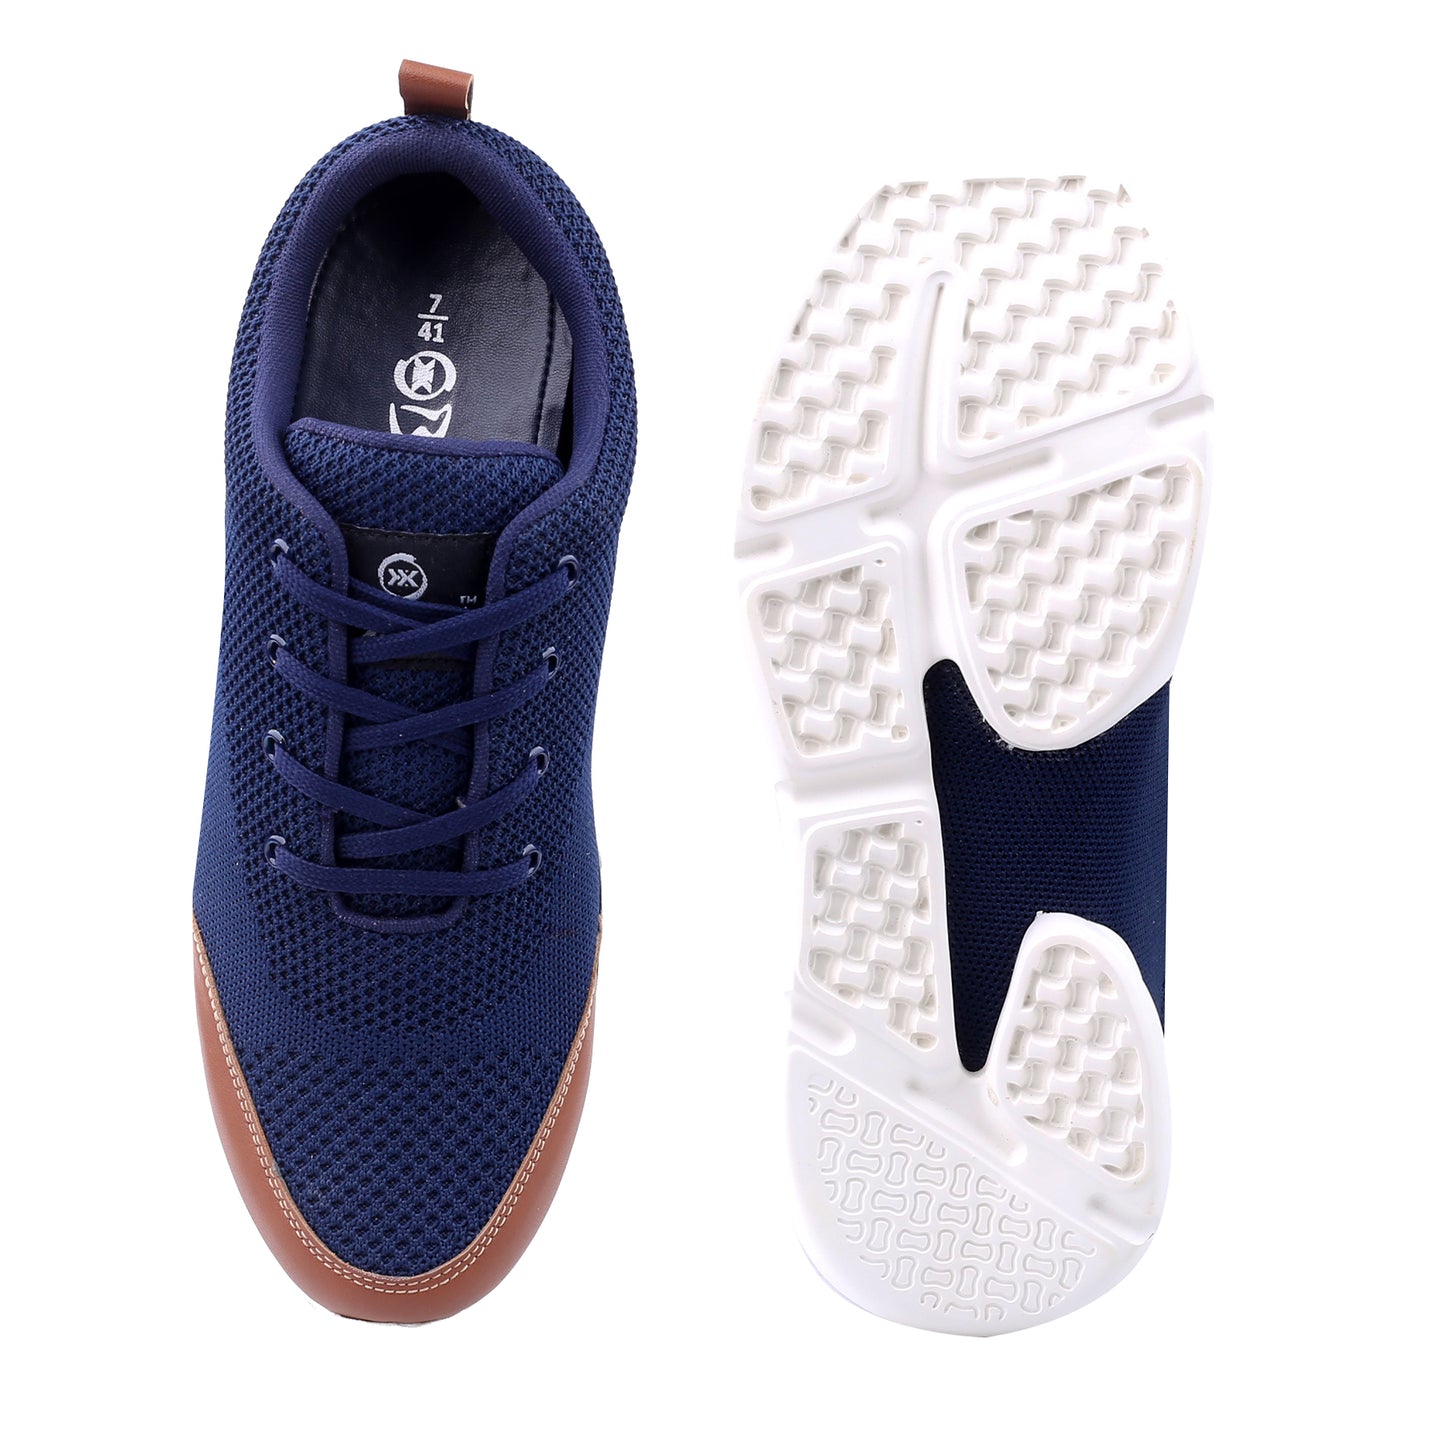 Bxxy Men's 3 Inch Hidden Height Increasing Stylish Casual Sports Lace-Up Shoes